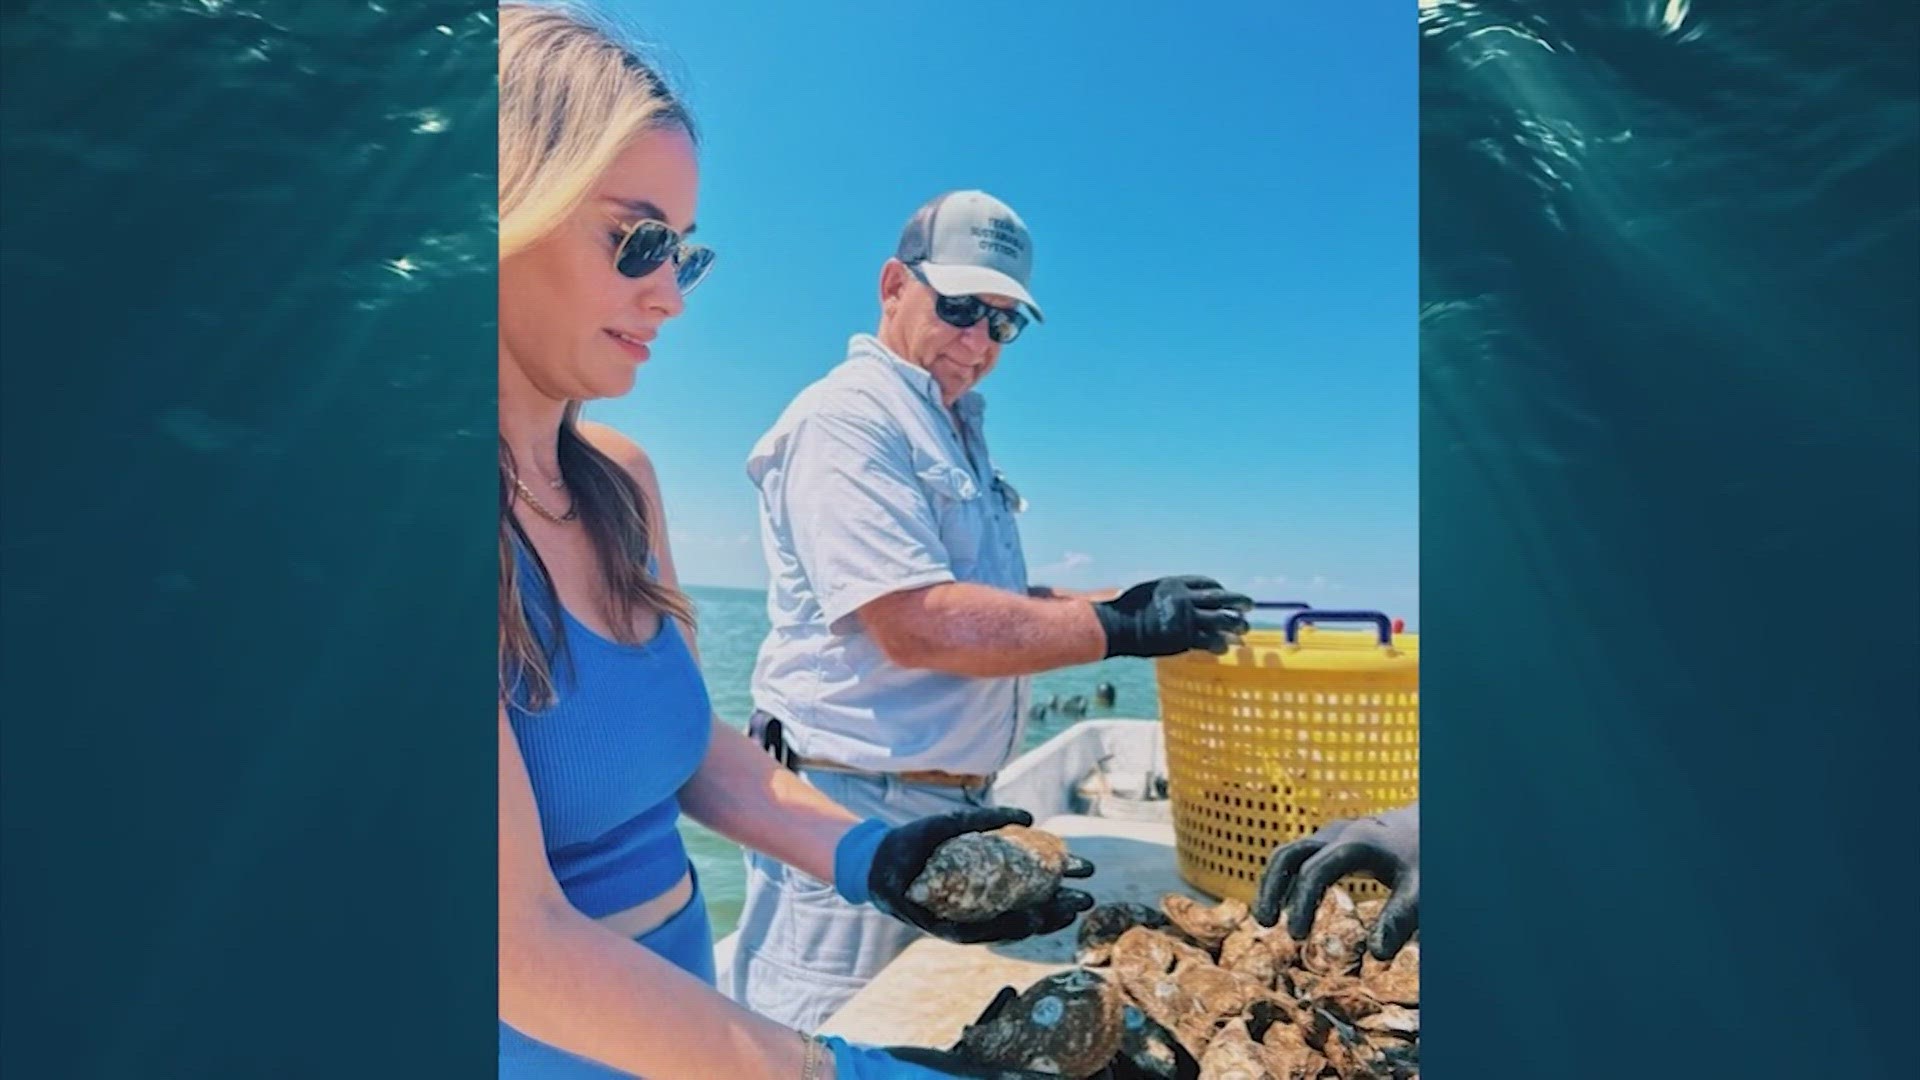 Hannah Kaplan and her father took an idea and created "Barrier Beauties,” a sustainable oyster farm.